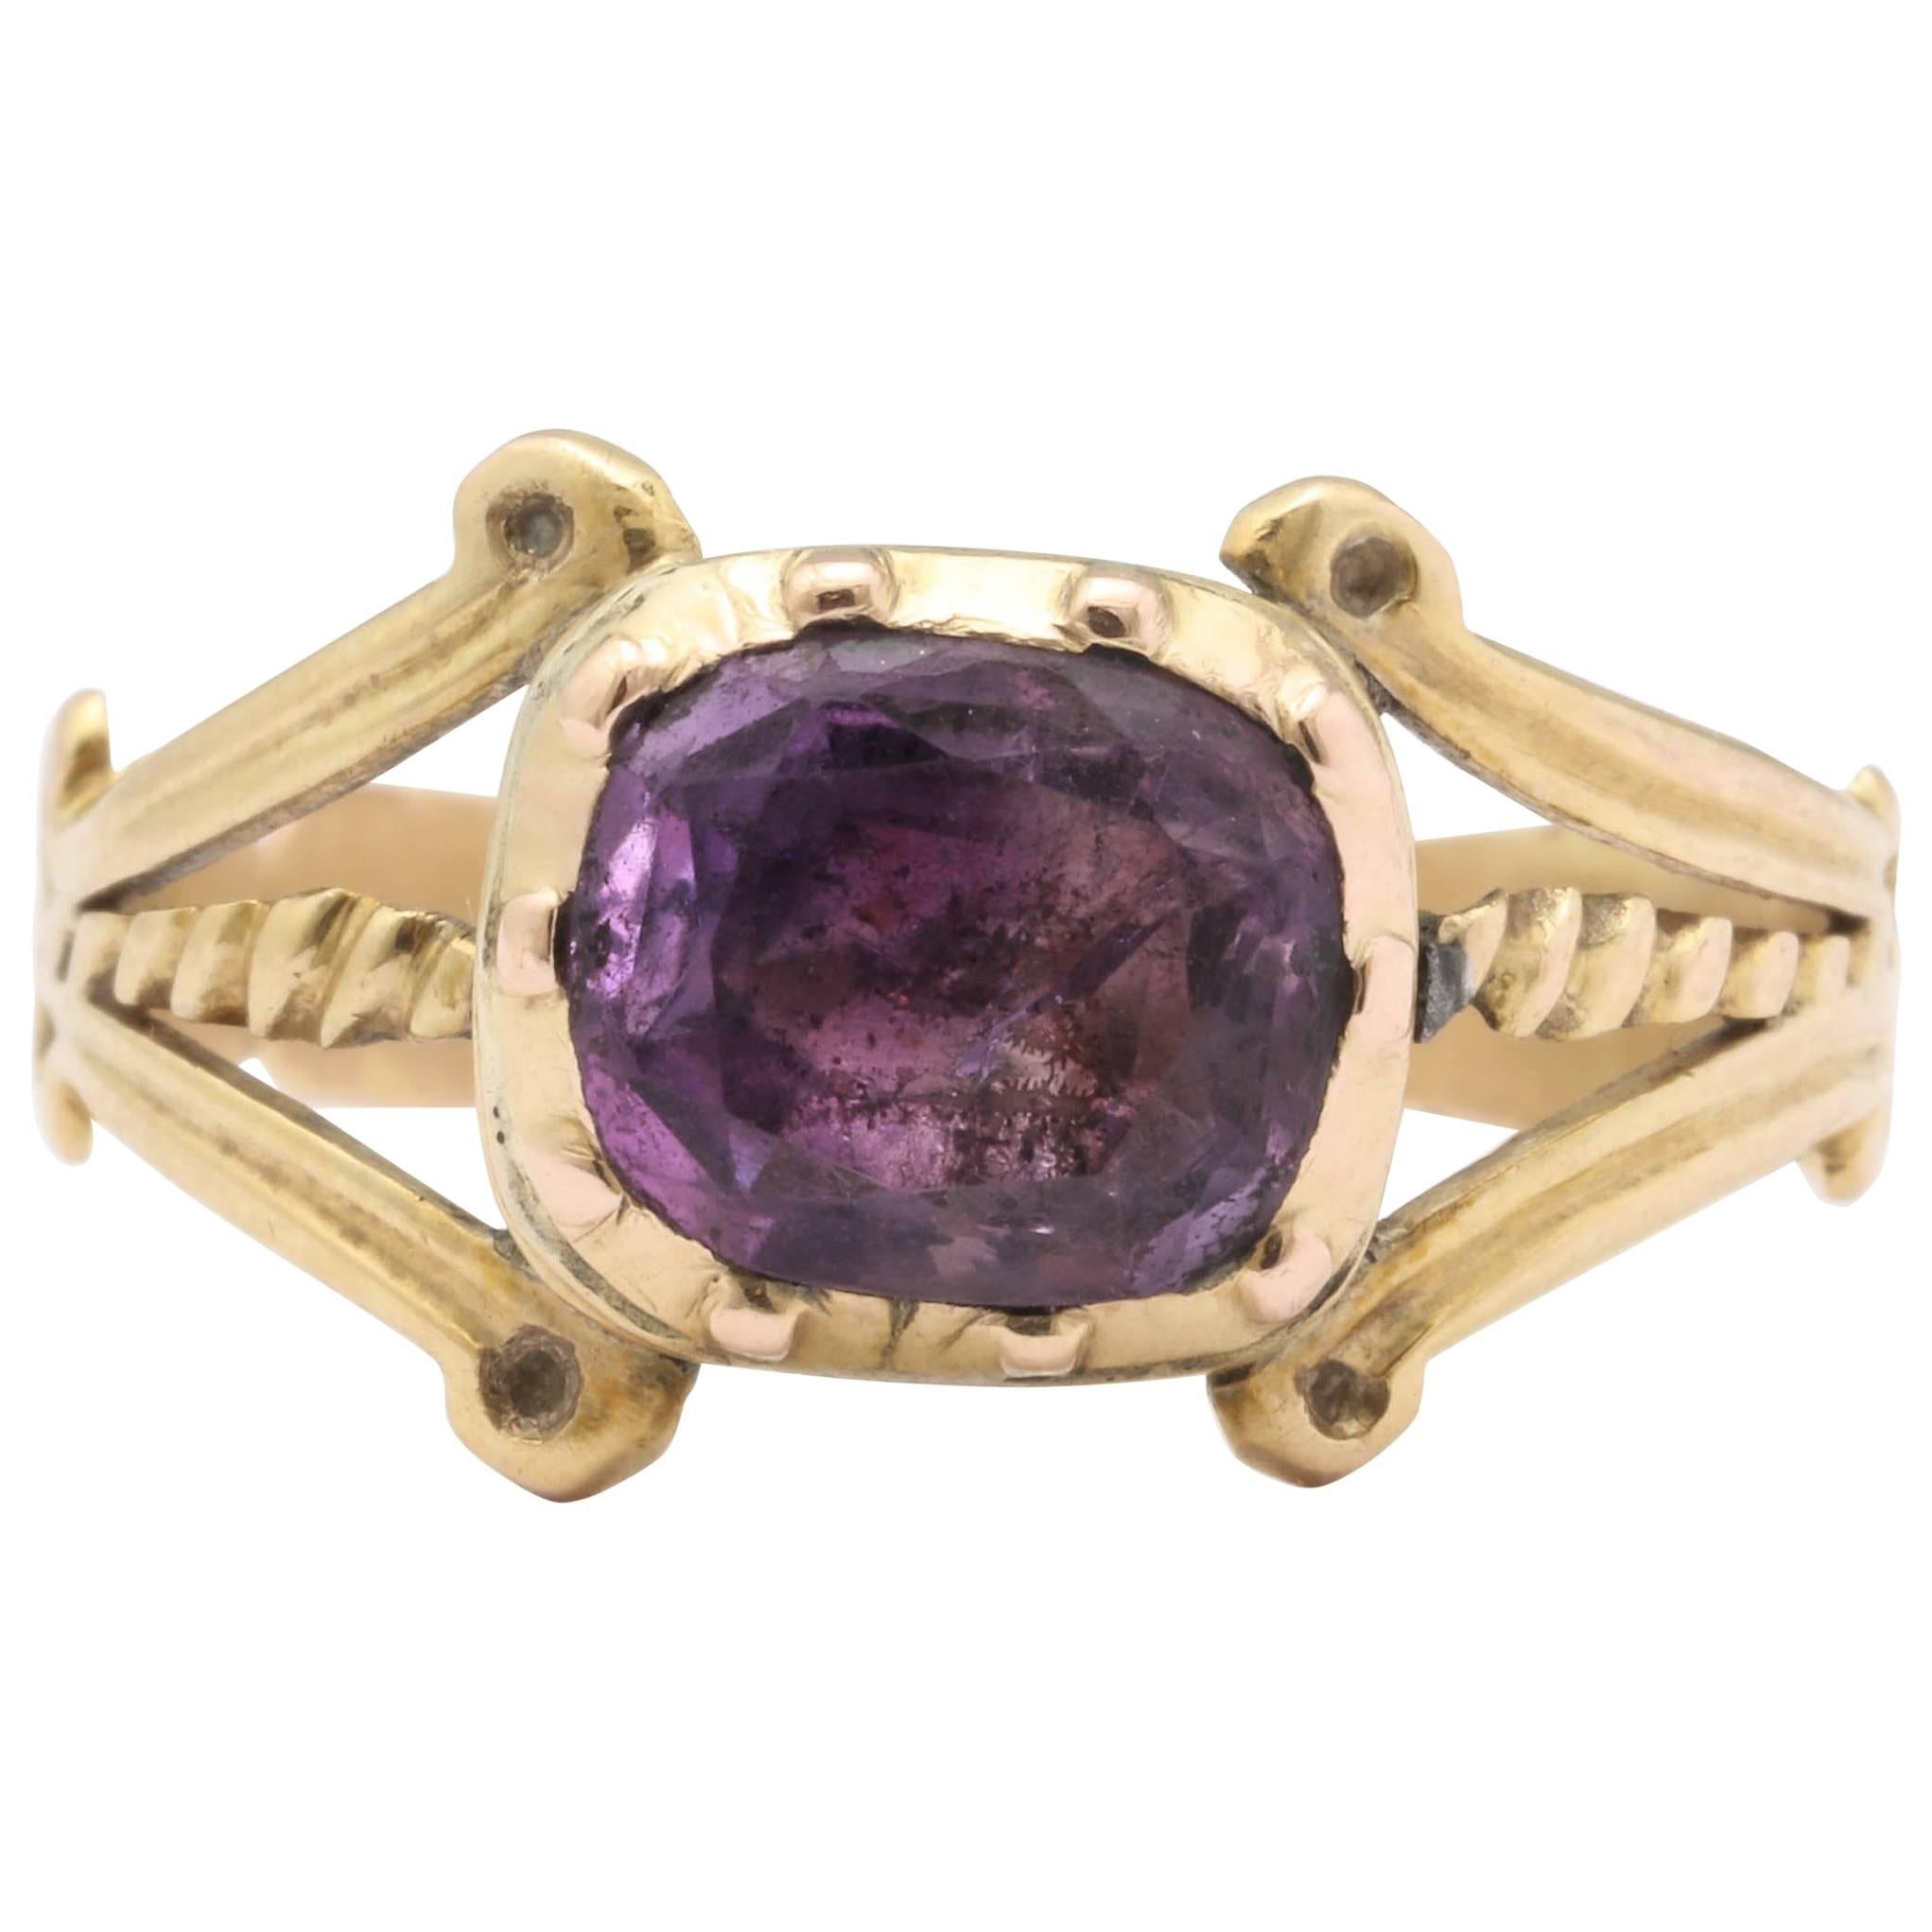 Georgian Amethyst Gold Ring with Victorian Shank